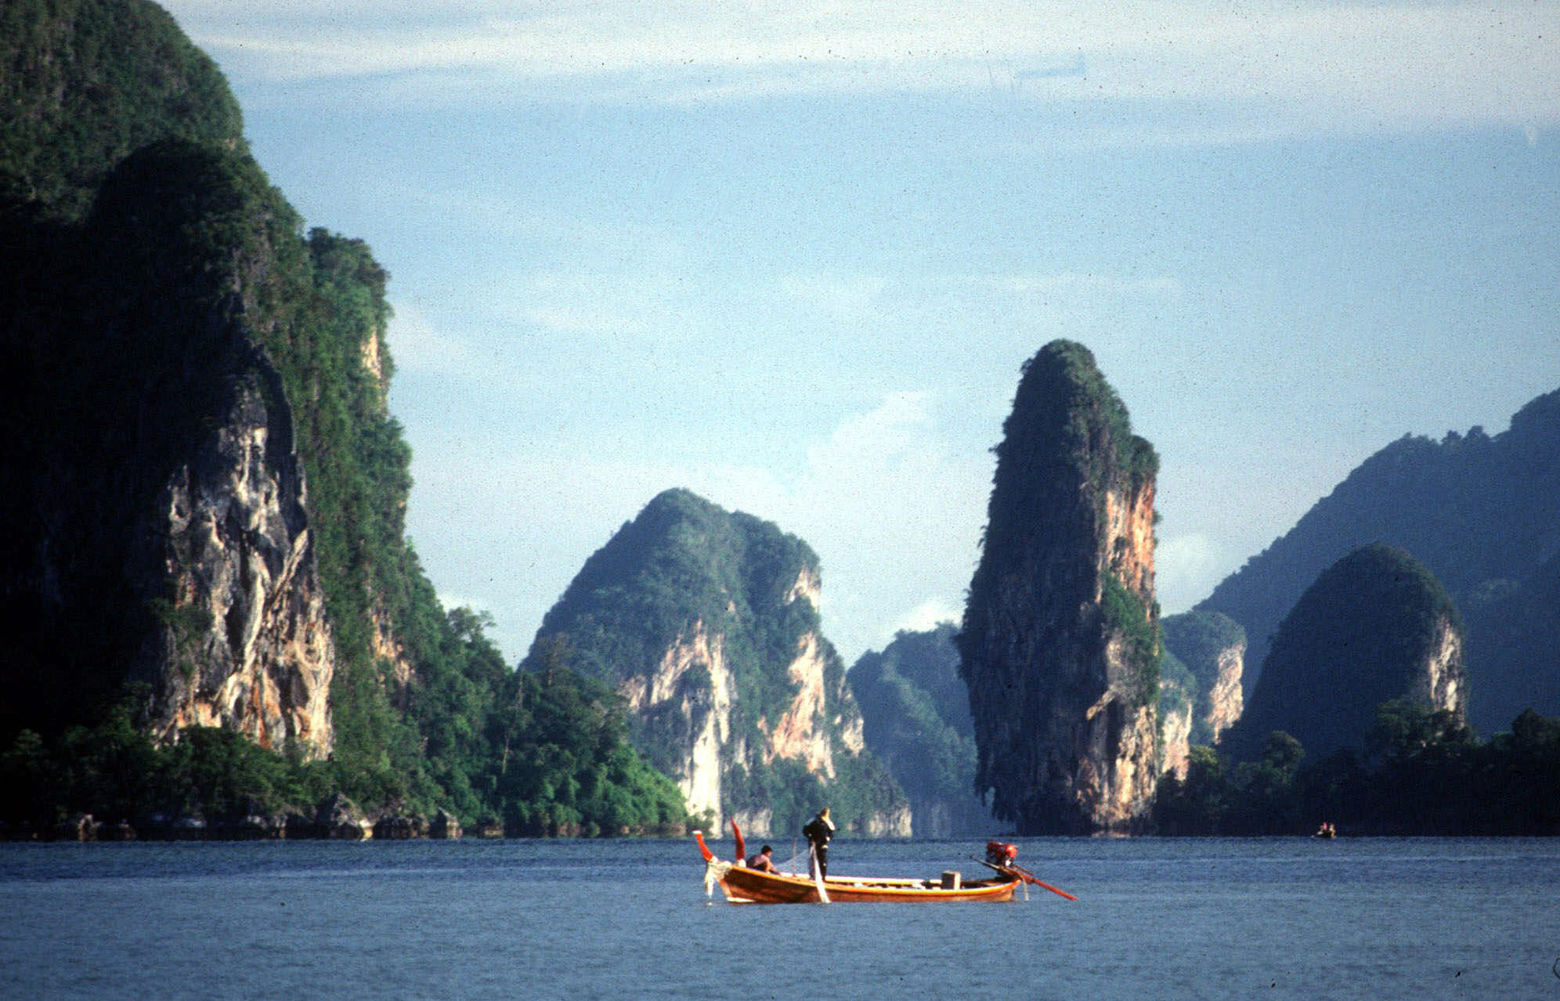 A fisherman's boat floats in Phang-Nga Bay in southern Thailand in 1997. Kayak tours to sea caves along the bay were meant to be a model of eco-tourism for Asia. But today, boats jam the narrow passages, tourists snap off stalactites for souvenirs, and their bellowing scares away gibbons, hornbills and other wildlife. (AP Photo/John Everingham)